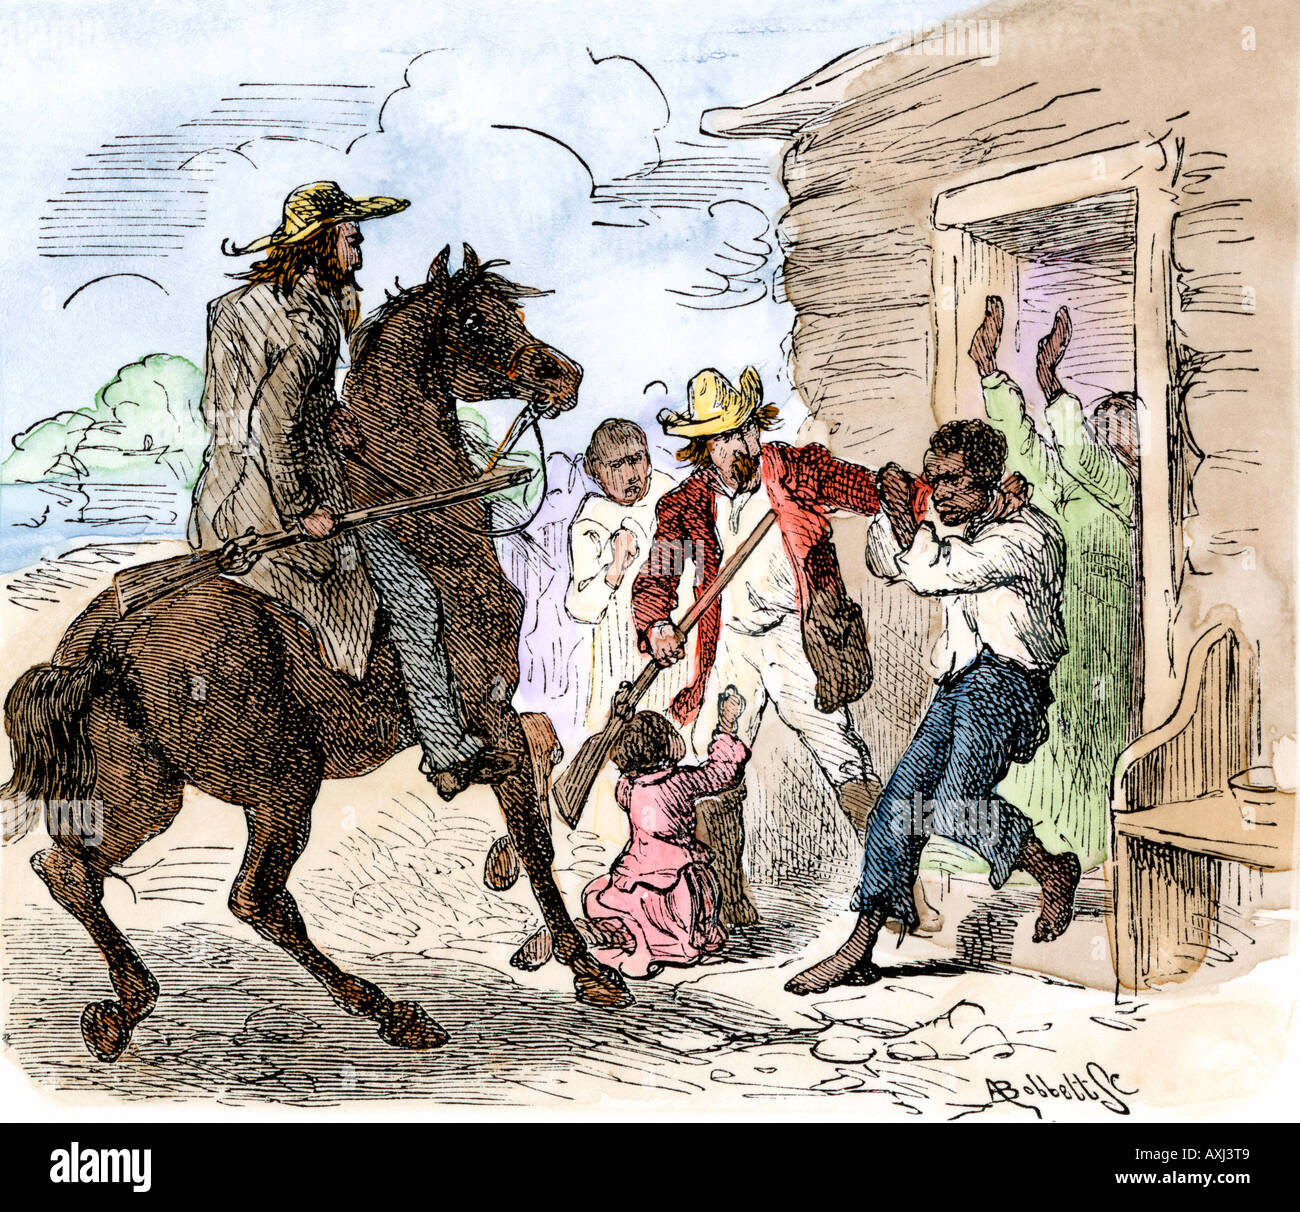 escaped-slave-being-captured-in-the-north-under-the-fugitive-slave-AXJ3T9.jpg